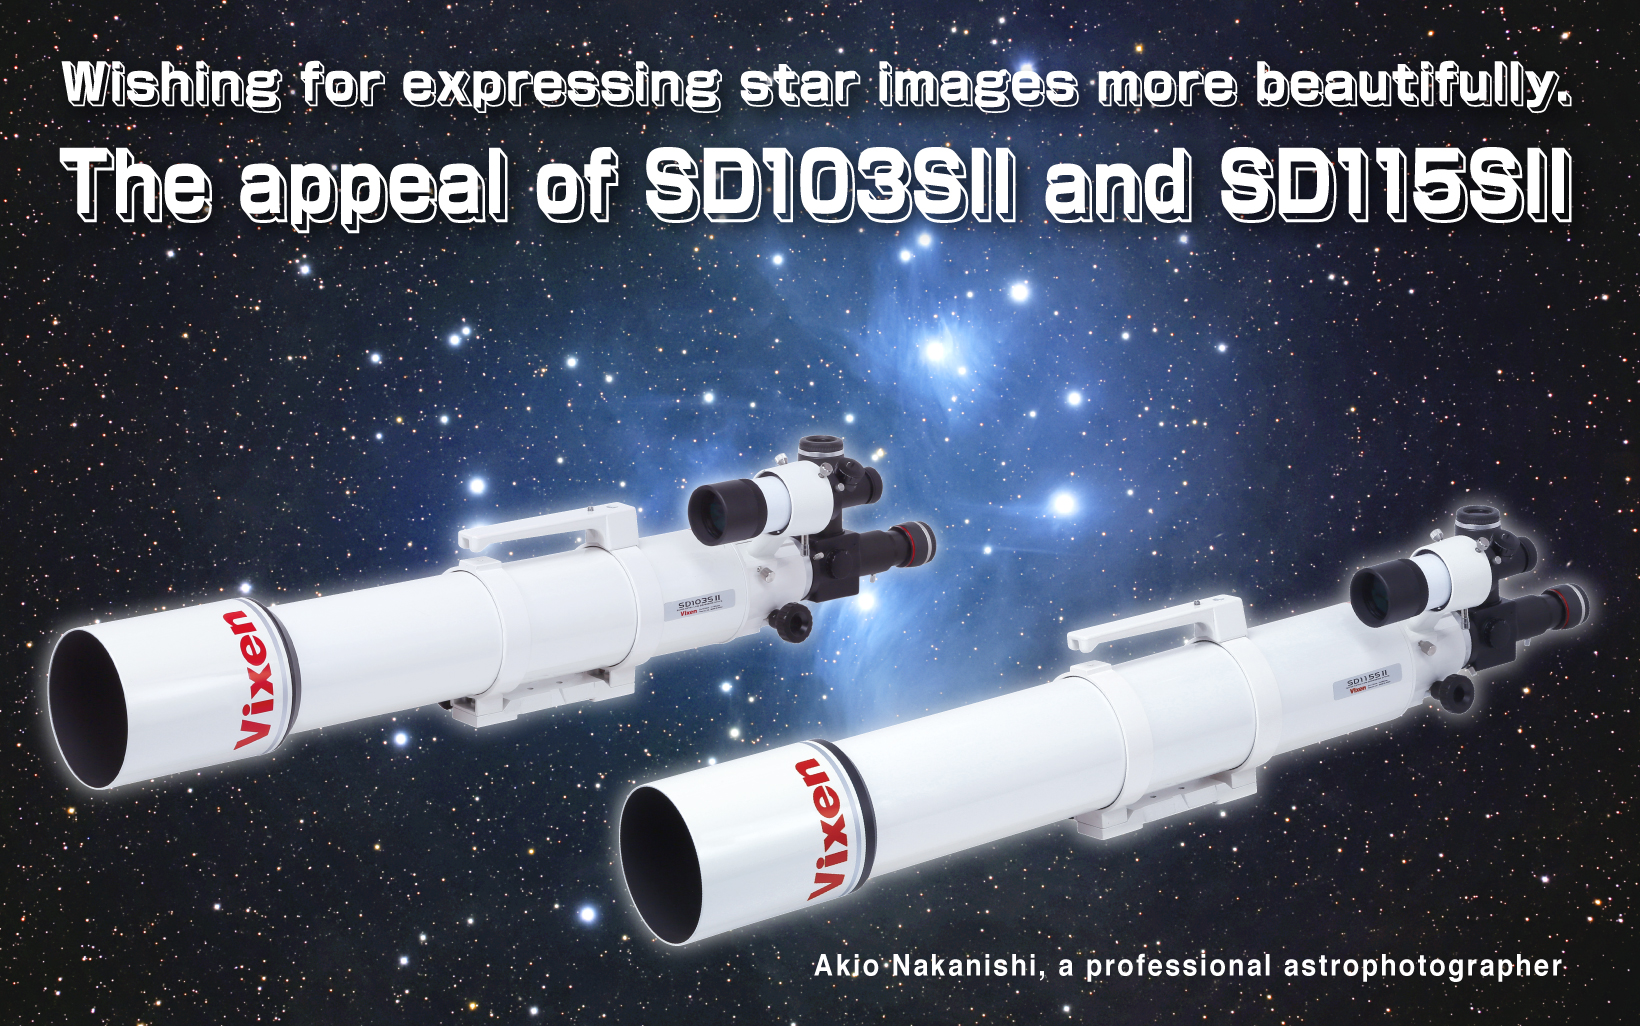 The appeal of an SD103SII and an SD115SII told by Akio Nakanishi.